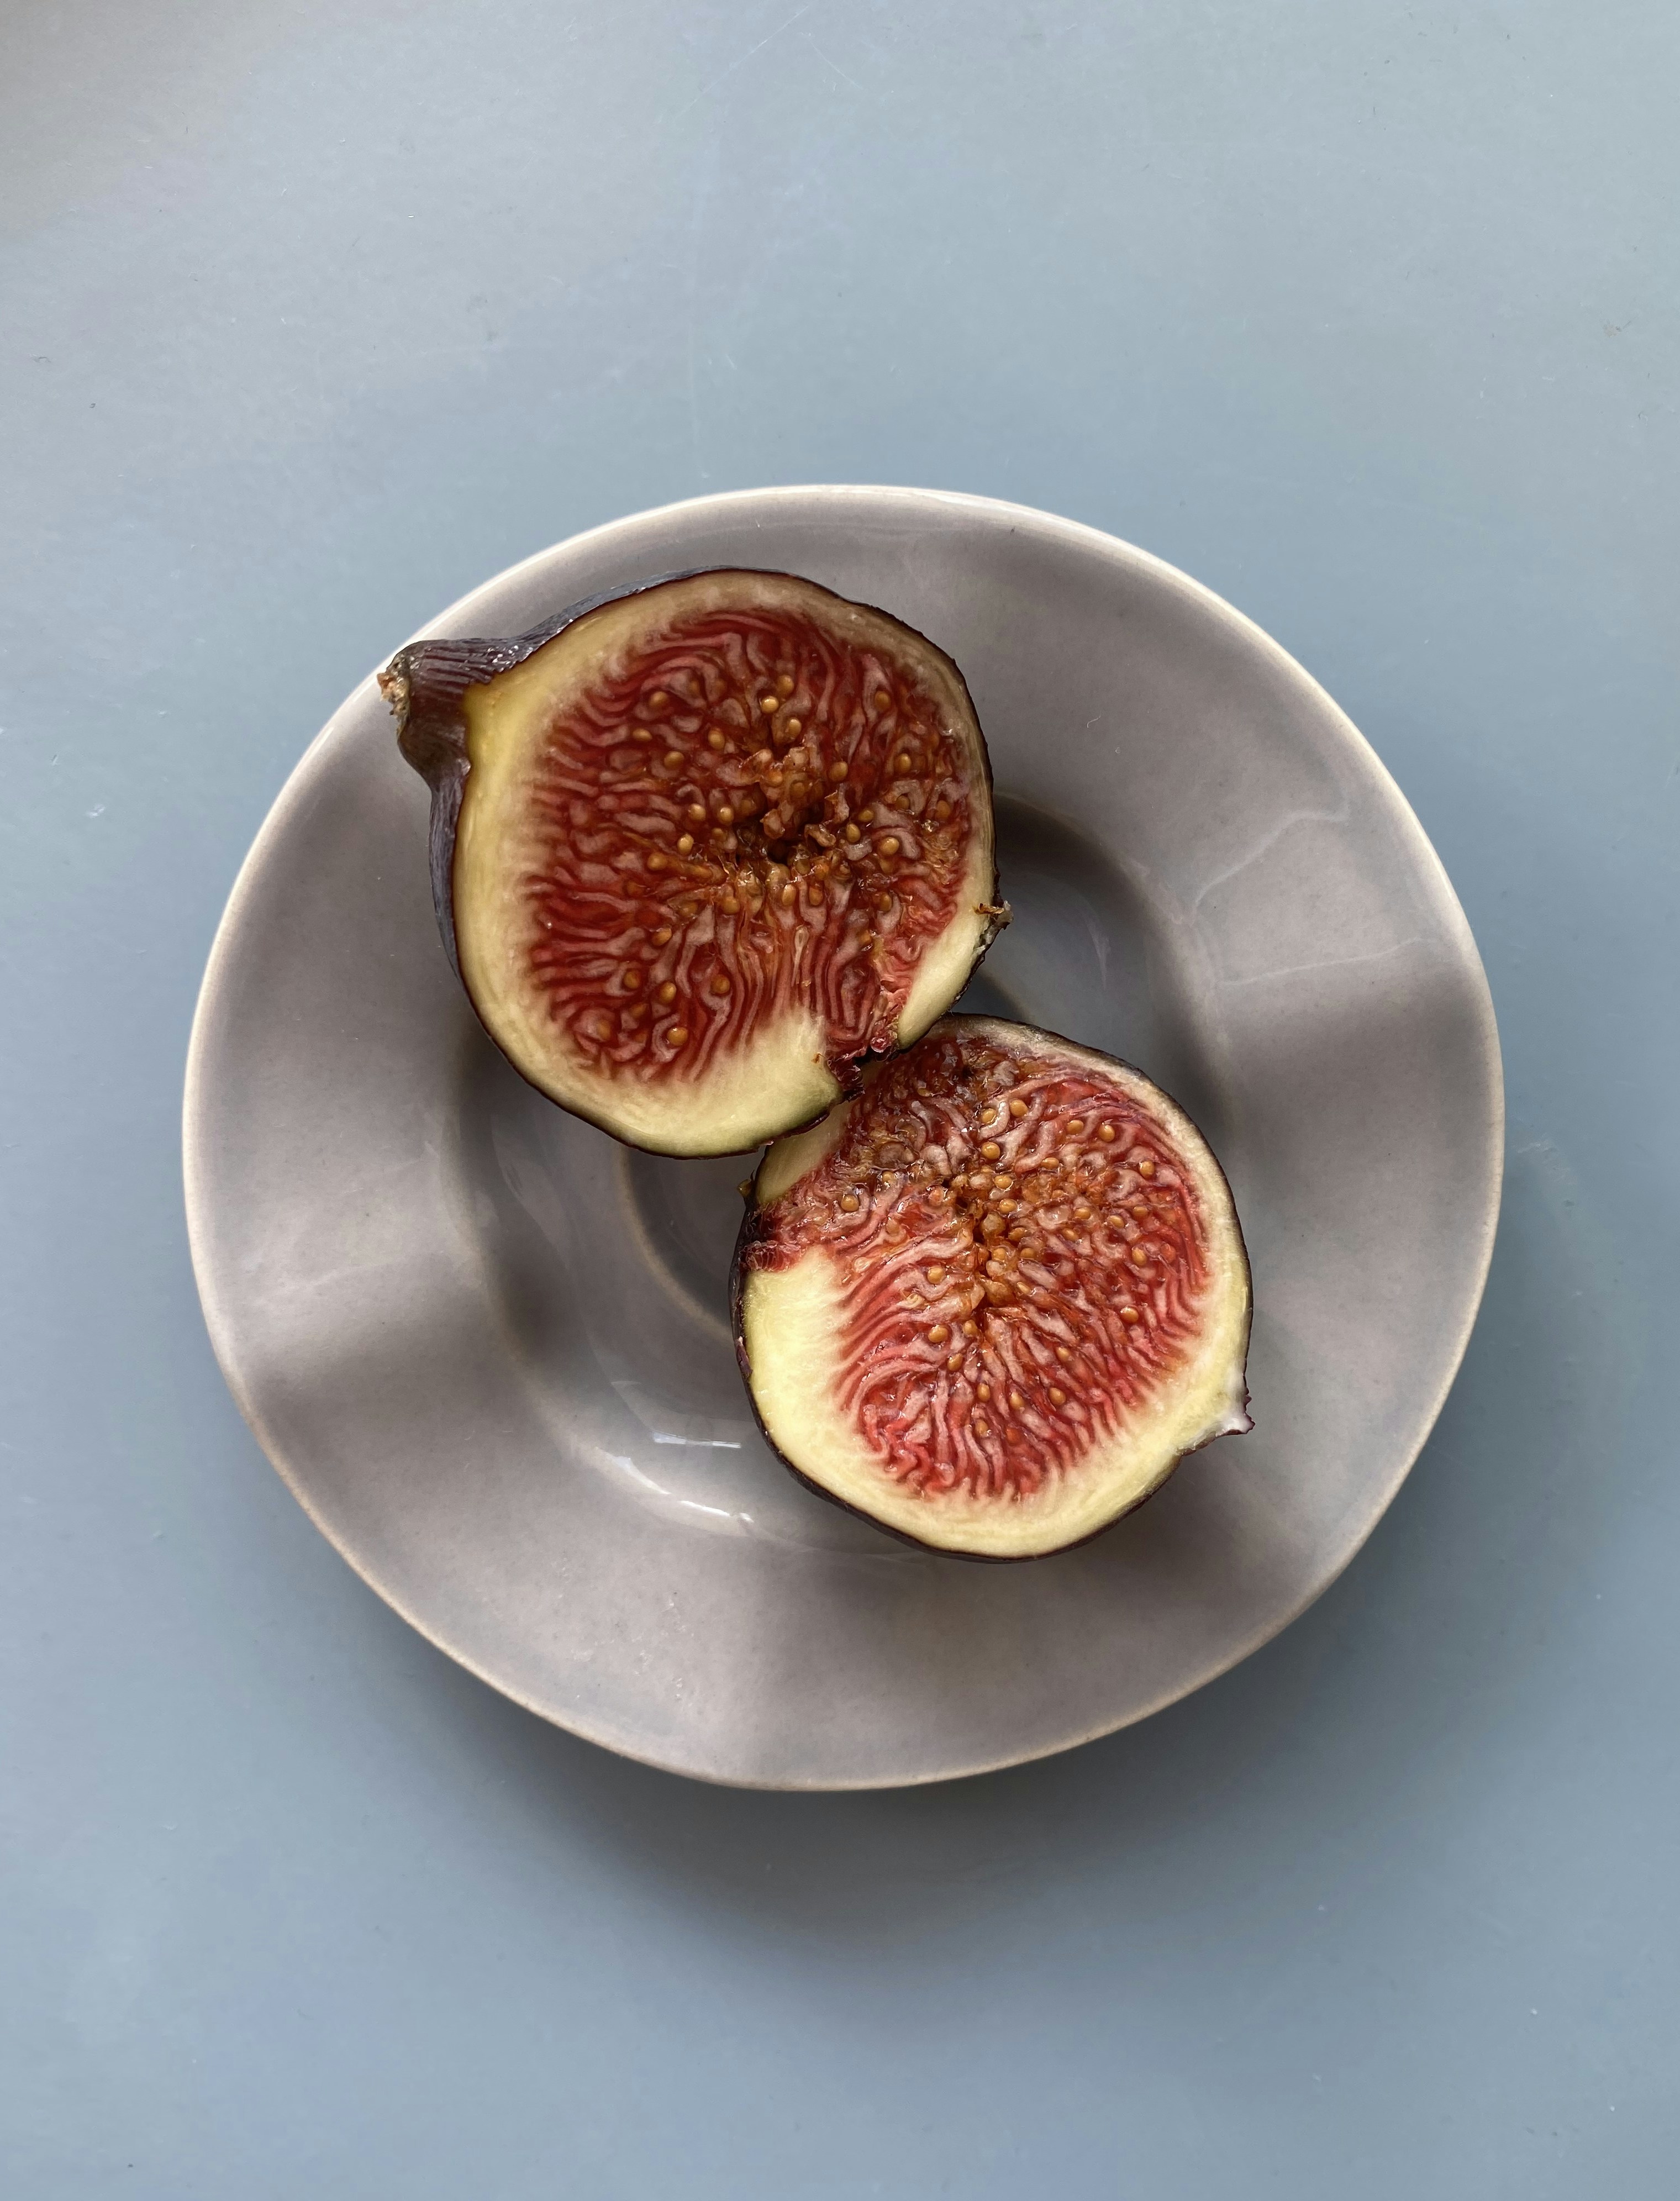 Figs: Benefits, side effects, and nutrition